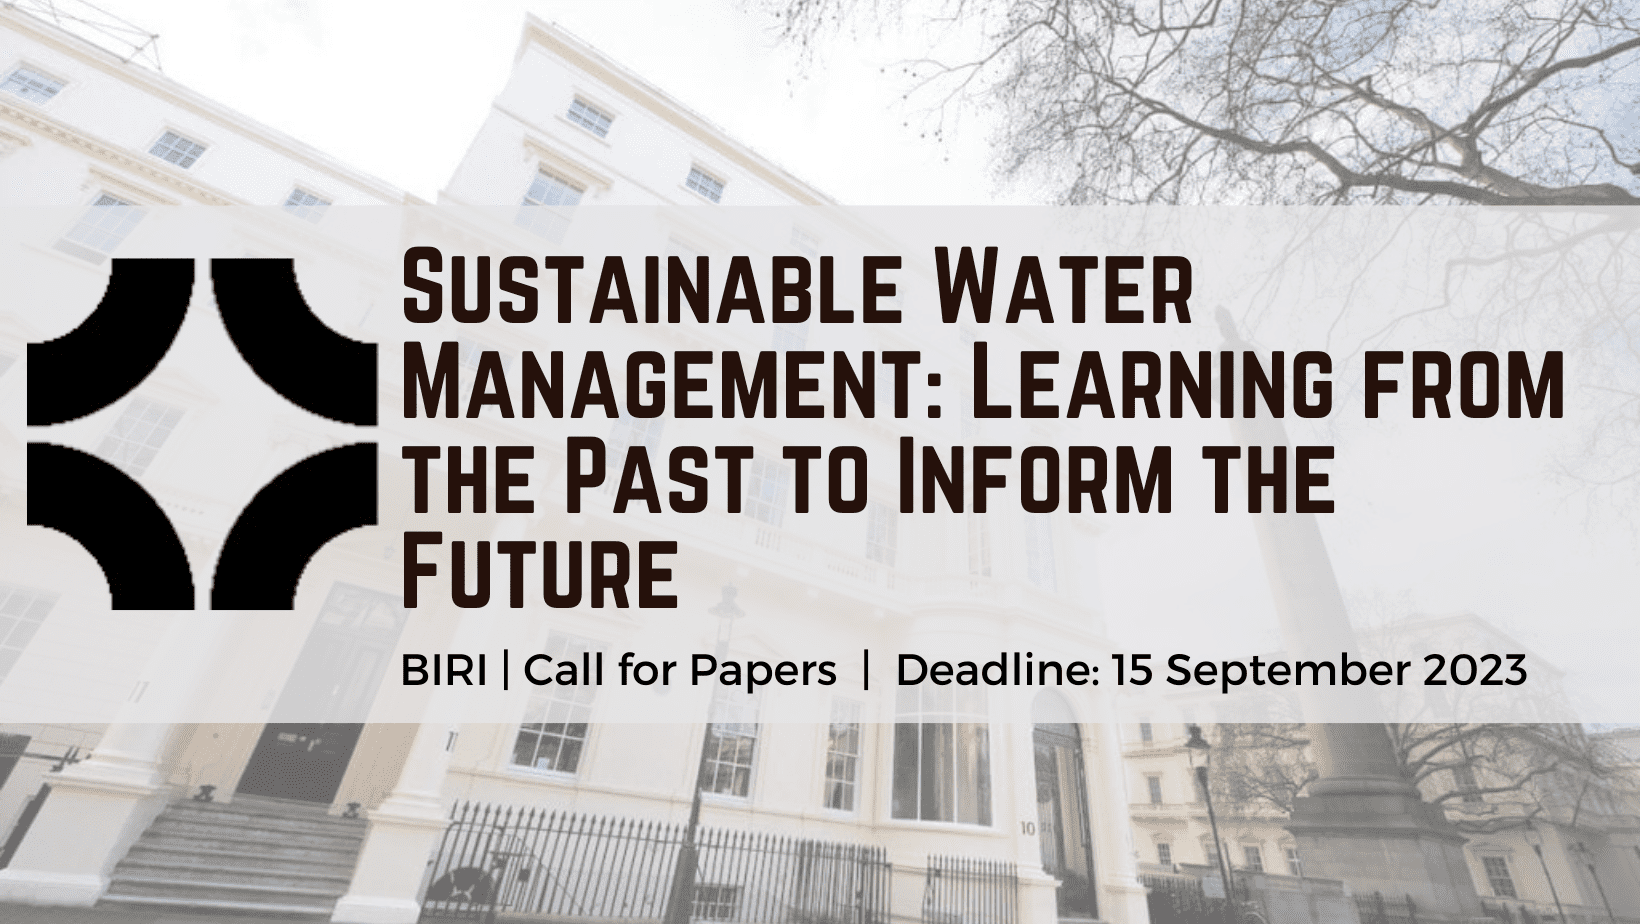 BIP Call for applicants: Towards a sustainable water management